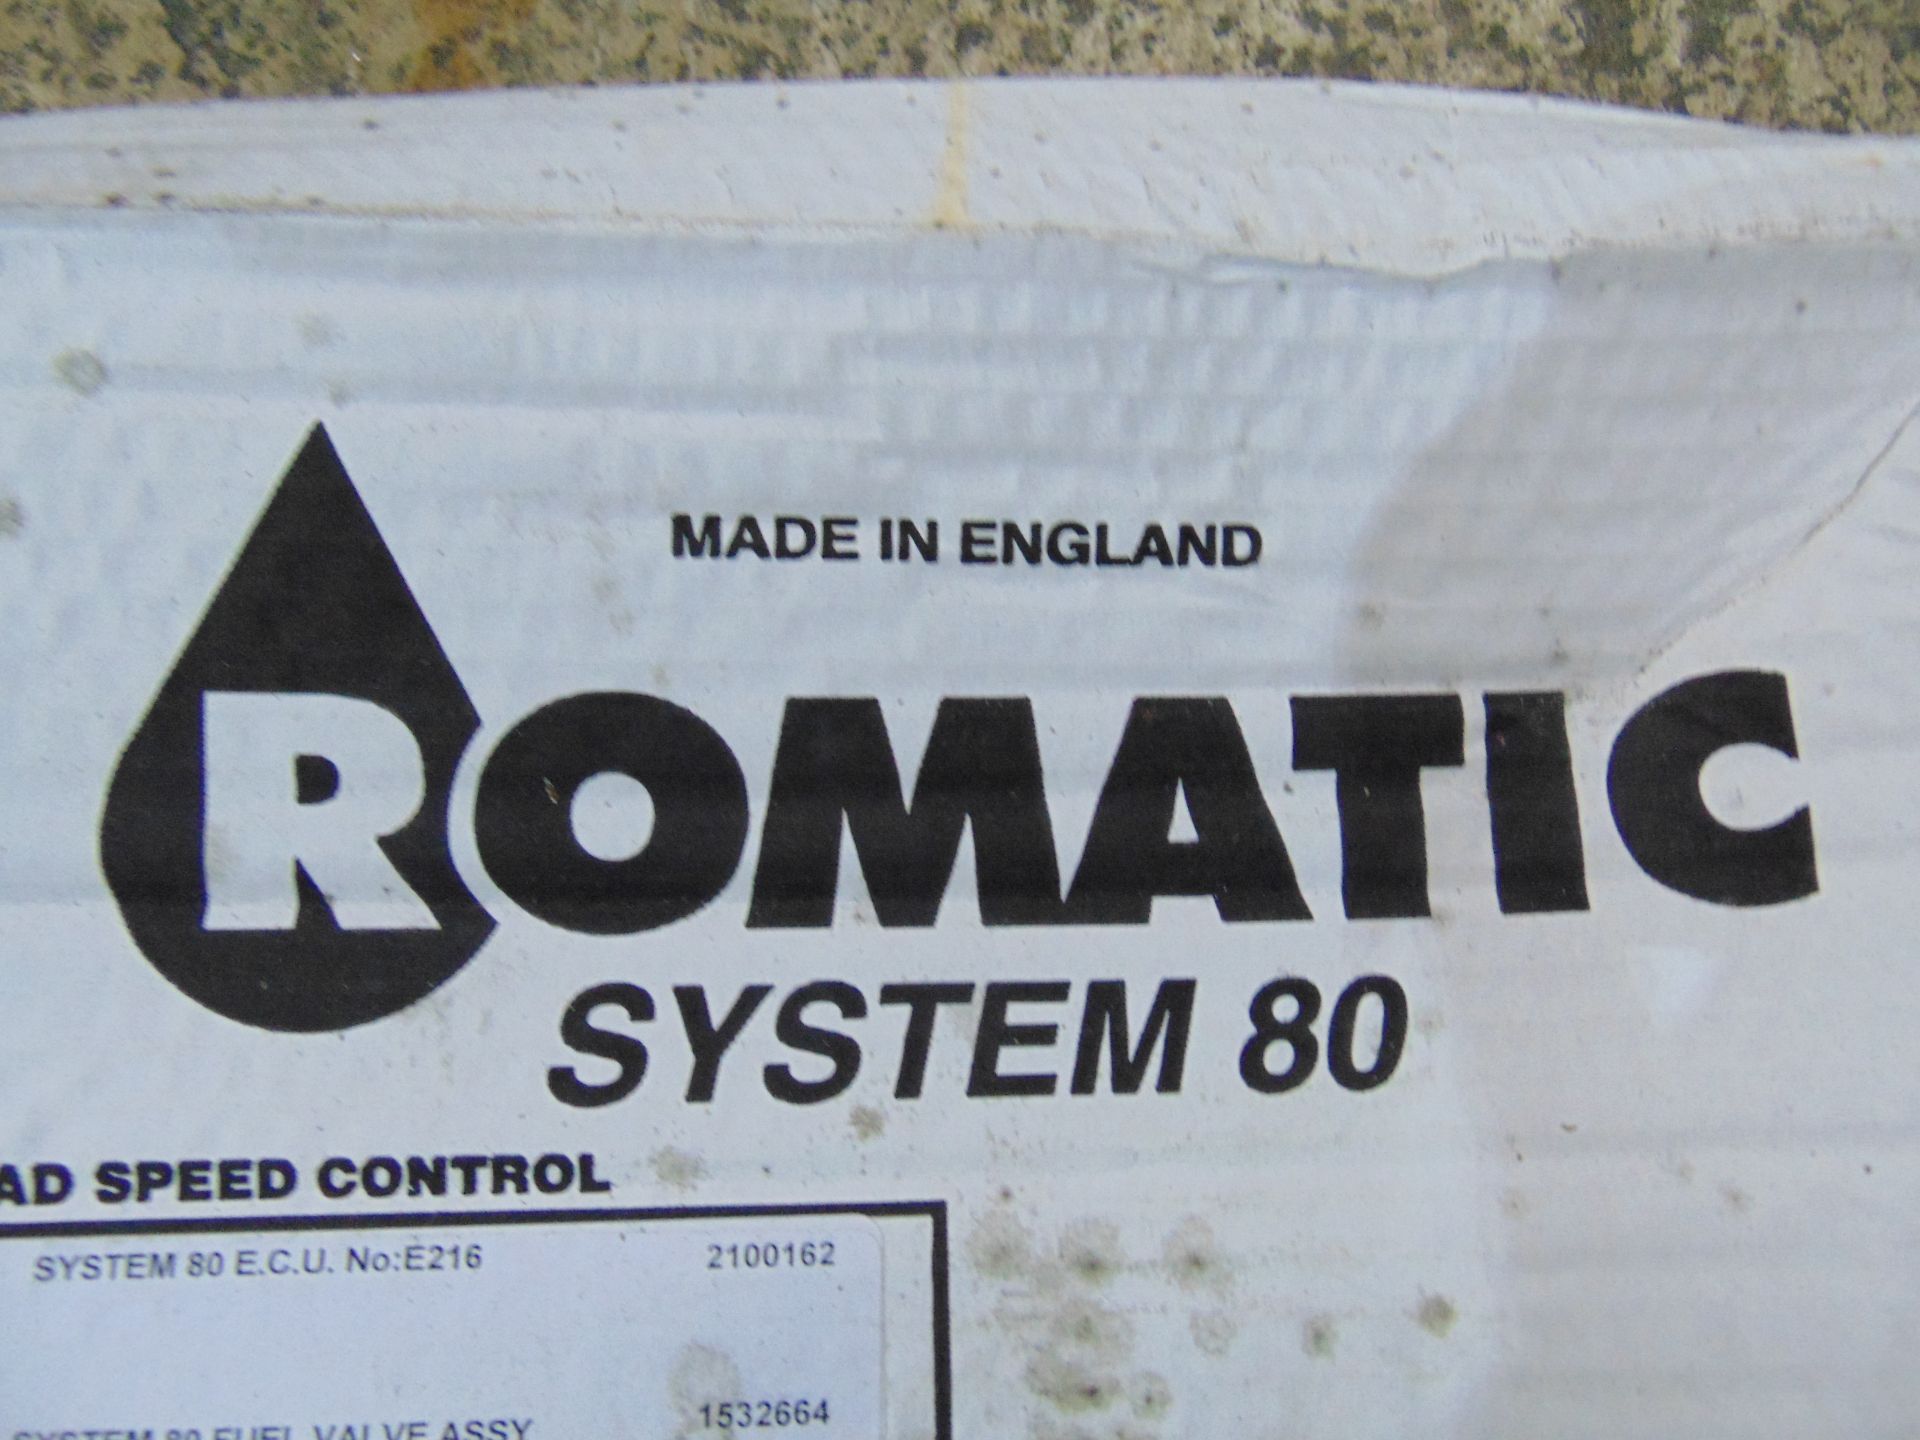 6 x Romatic System 80 Limiter Kits - Image 10 of 10